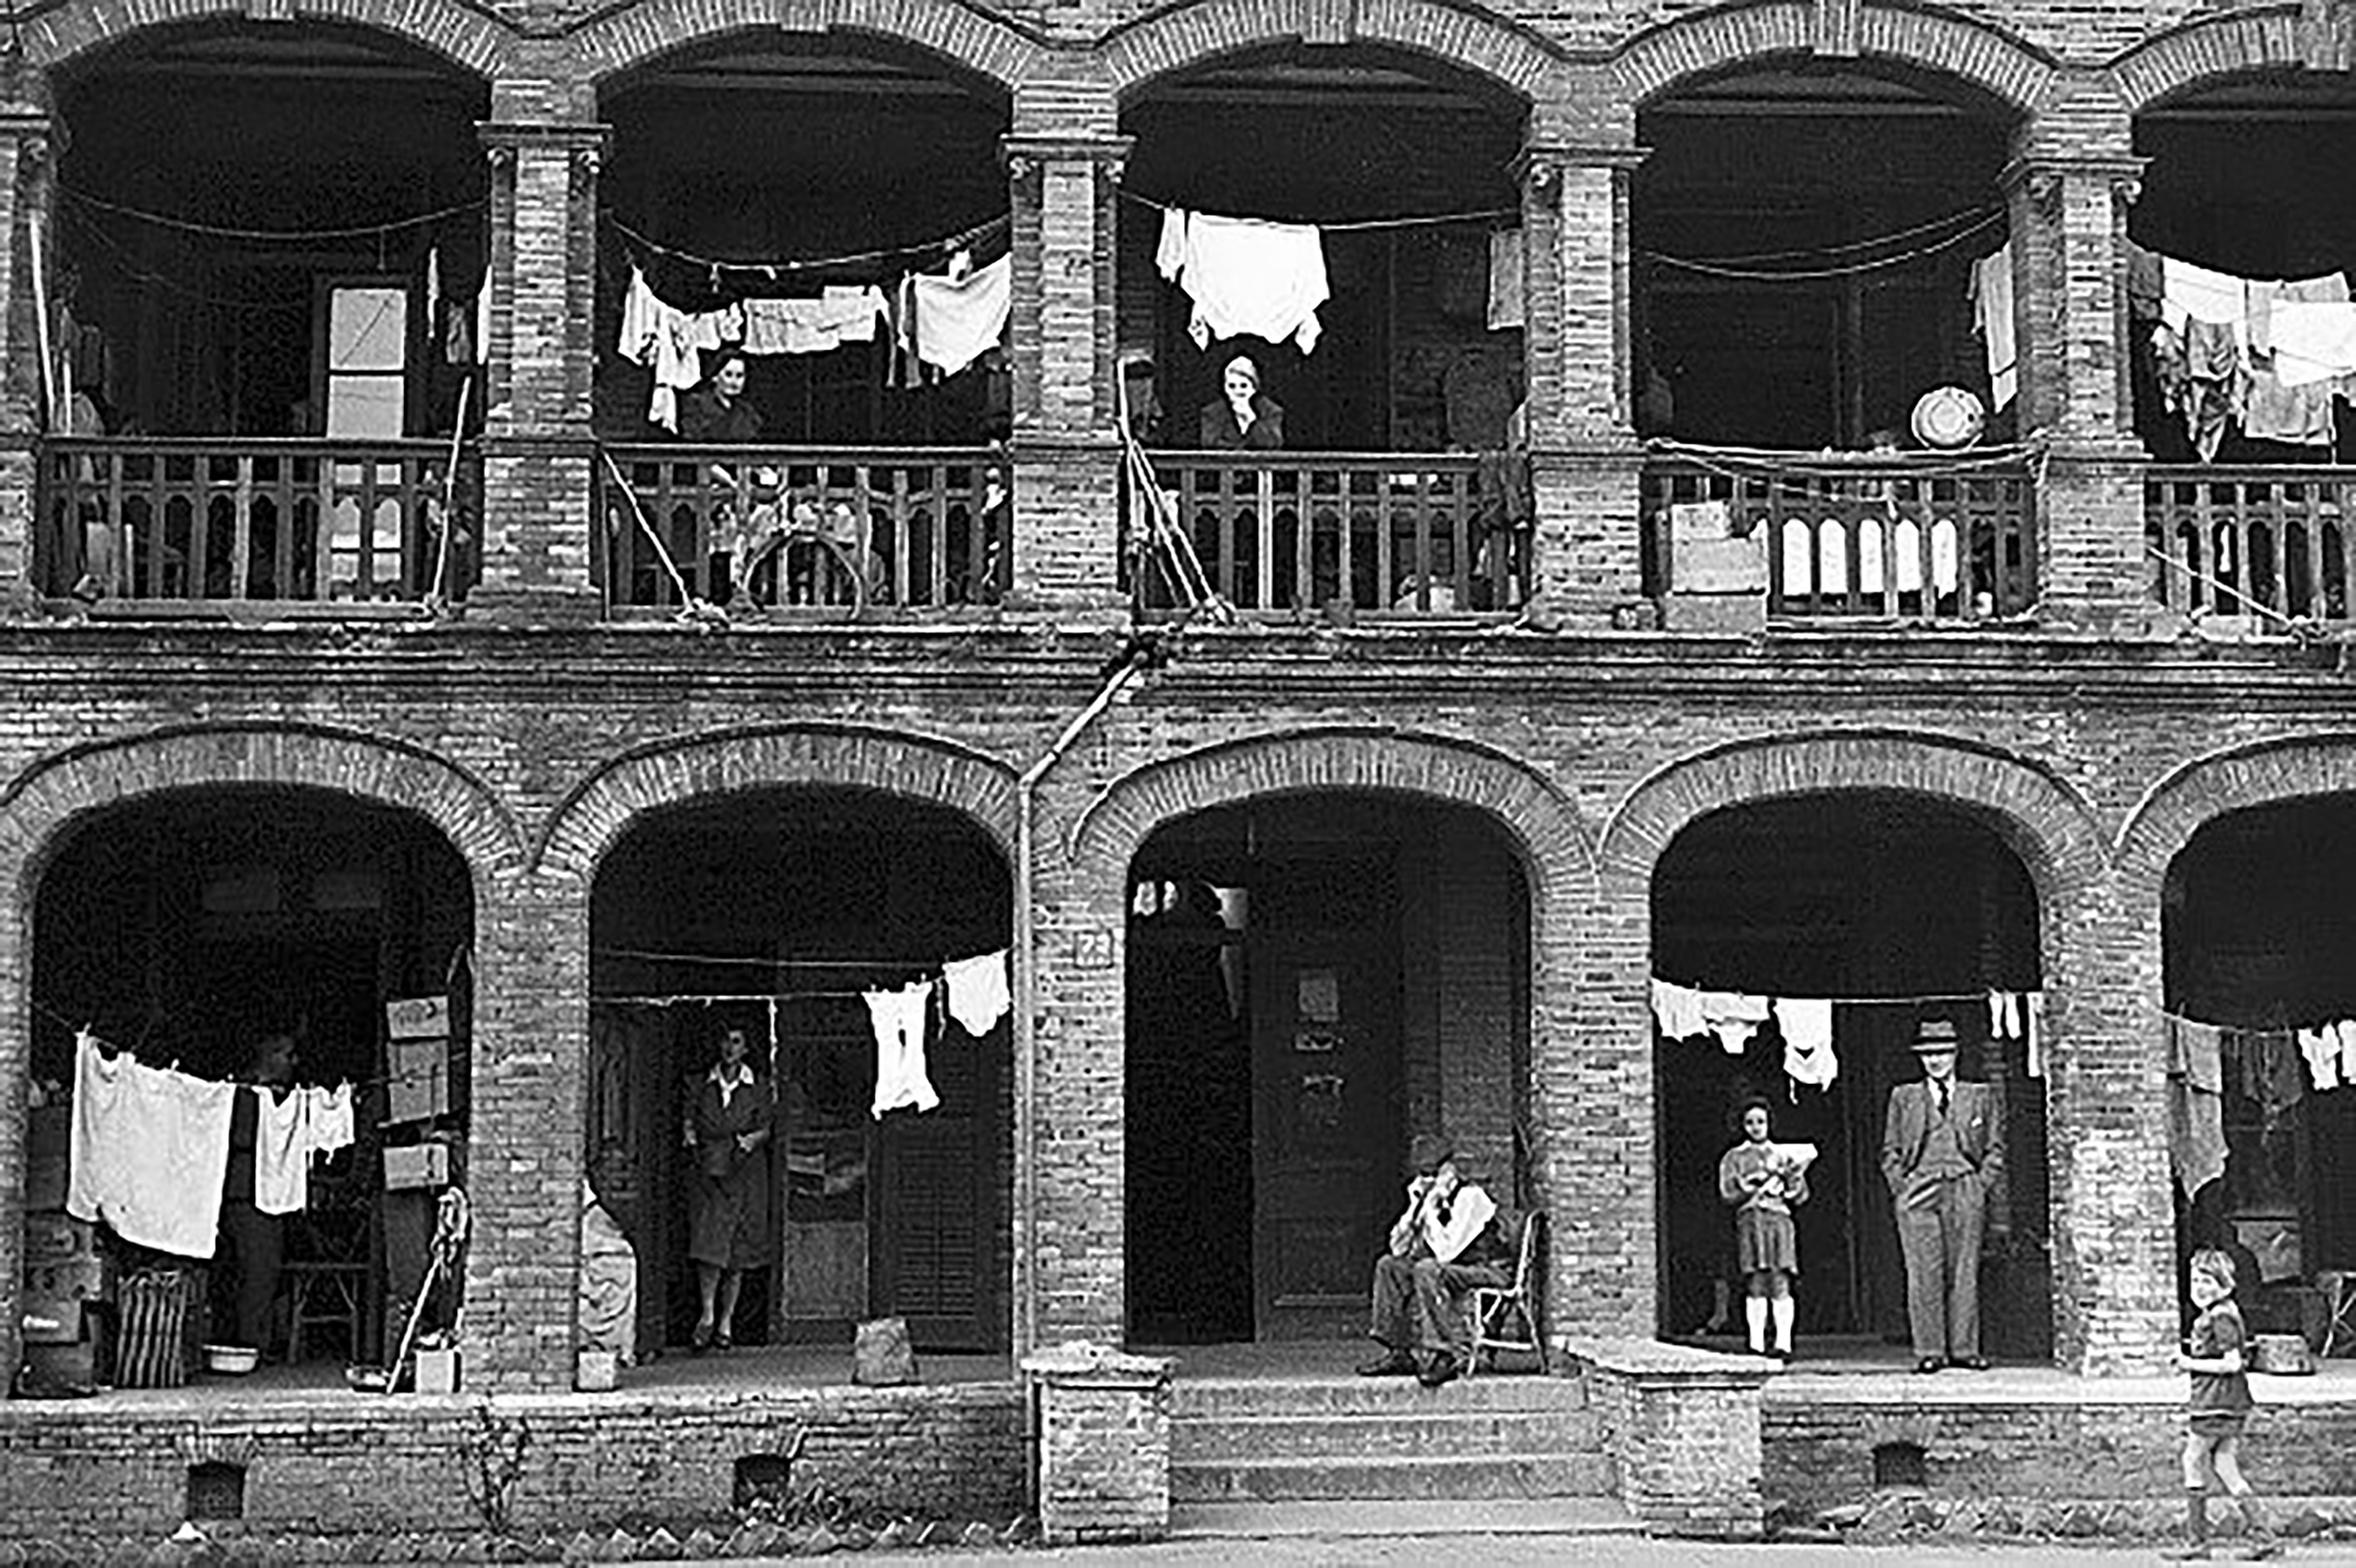 A communal home for Jewish refugees in Shanghai pictured in 1946. Photo: Arthur Rothstein